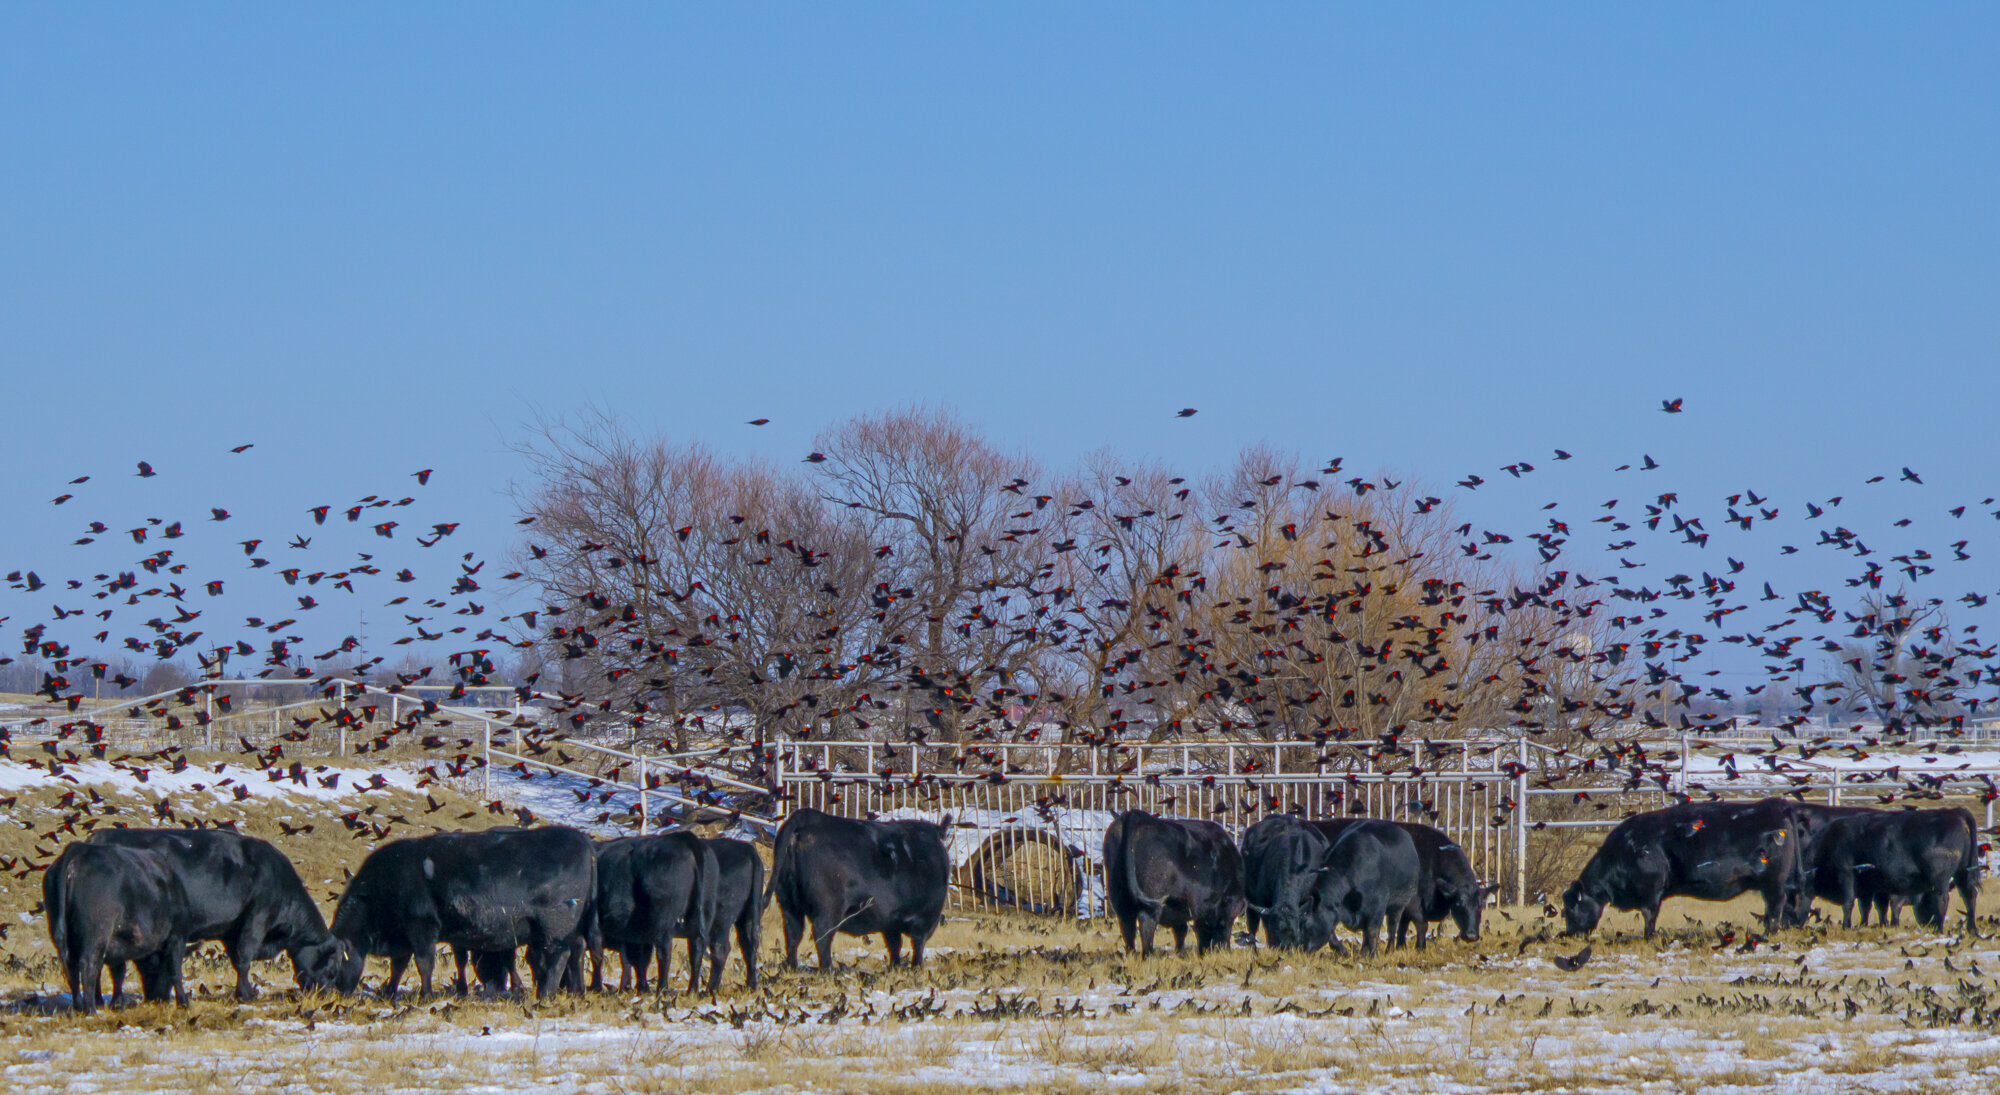 Redwing Blackbirds and Cows in Snow